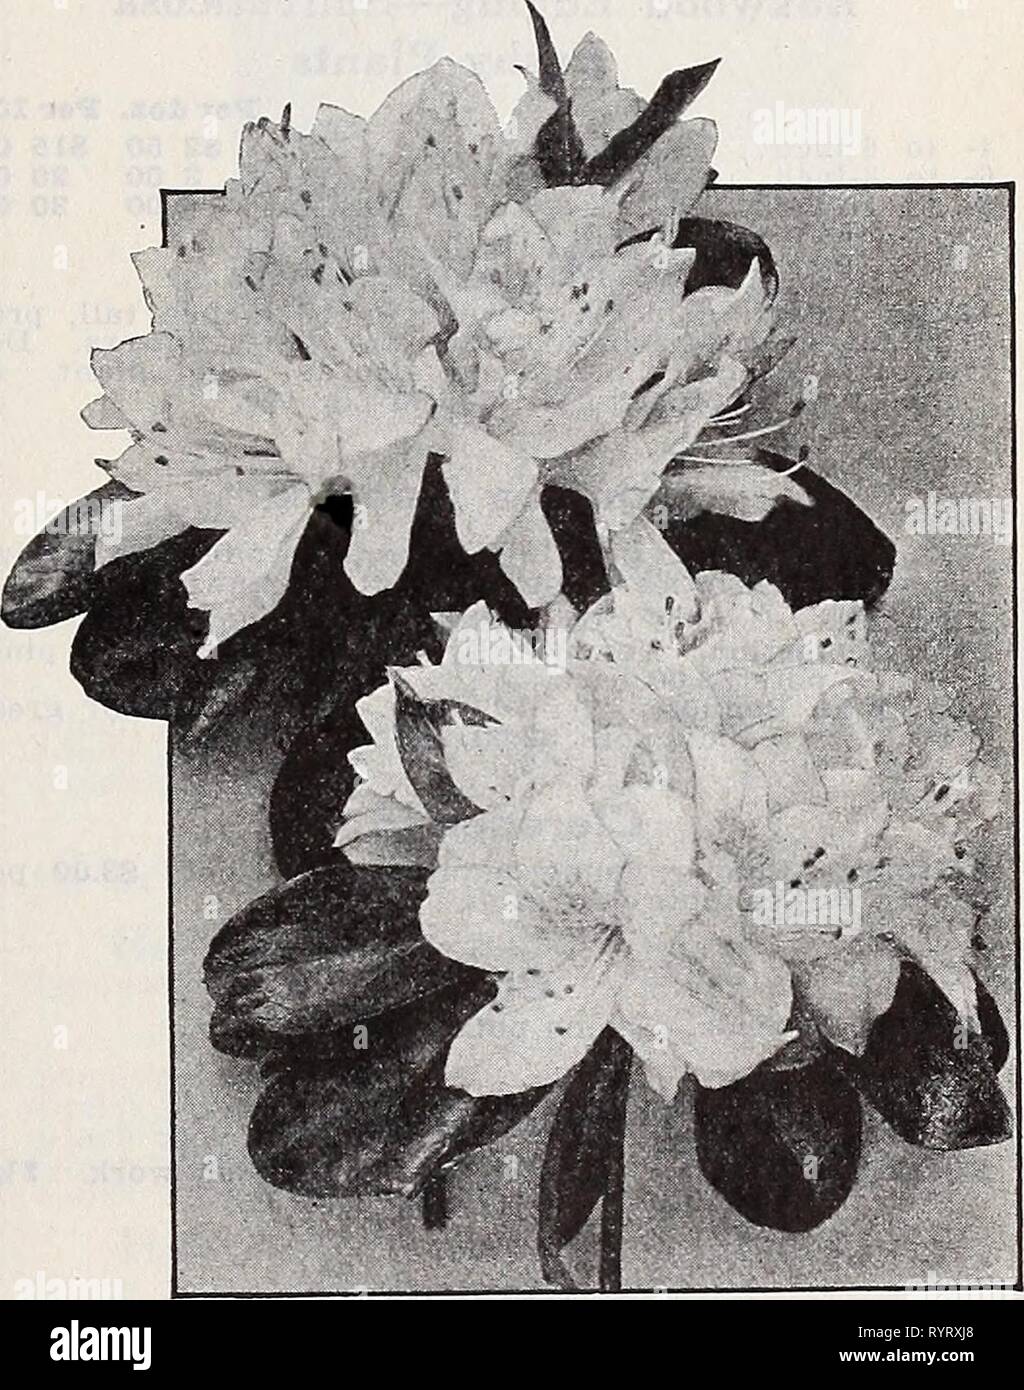 Dreer's wholesale catalog for florists Dreer's wholesale catalog for florists and market gardeners : 1939 winter spring summer . dreerswholesalec1939henr Year: 1939  Agapanthus umbellatus Agapanthus Umbellatus. Strong plants in 6-inch pots. 75c each. Strong plants in 8-inch tubs, $2.50 each. Aglaonema Modestum (Chinese Evergreen). Showy rich green leaves. A choice house plant that may be grown in soil or in bowls filled with water. 2%%%%%%%%-inch pots $2.00 $io.OOÂ°per 10'0Â°Â° ^ 10Â°' 3'inÂ°h PÂ°tS' $3,Â°Â° per ^0Z-; AloysiaâLemon Verbena Citriodora. 3-inch pots $2.25 per doz.; $14.00 per 100 Stock Photo